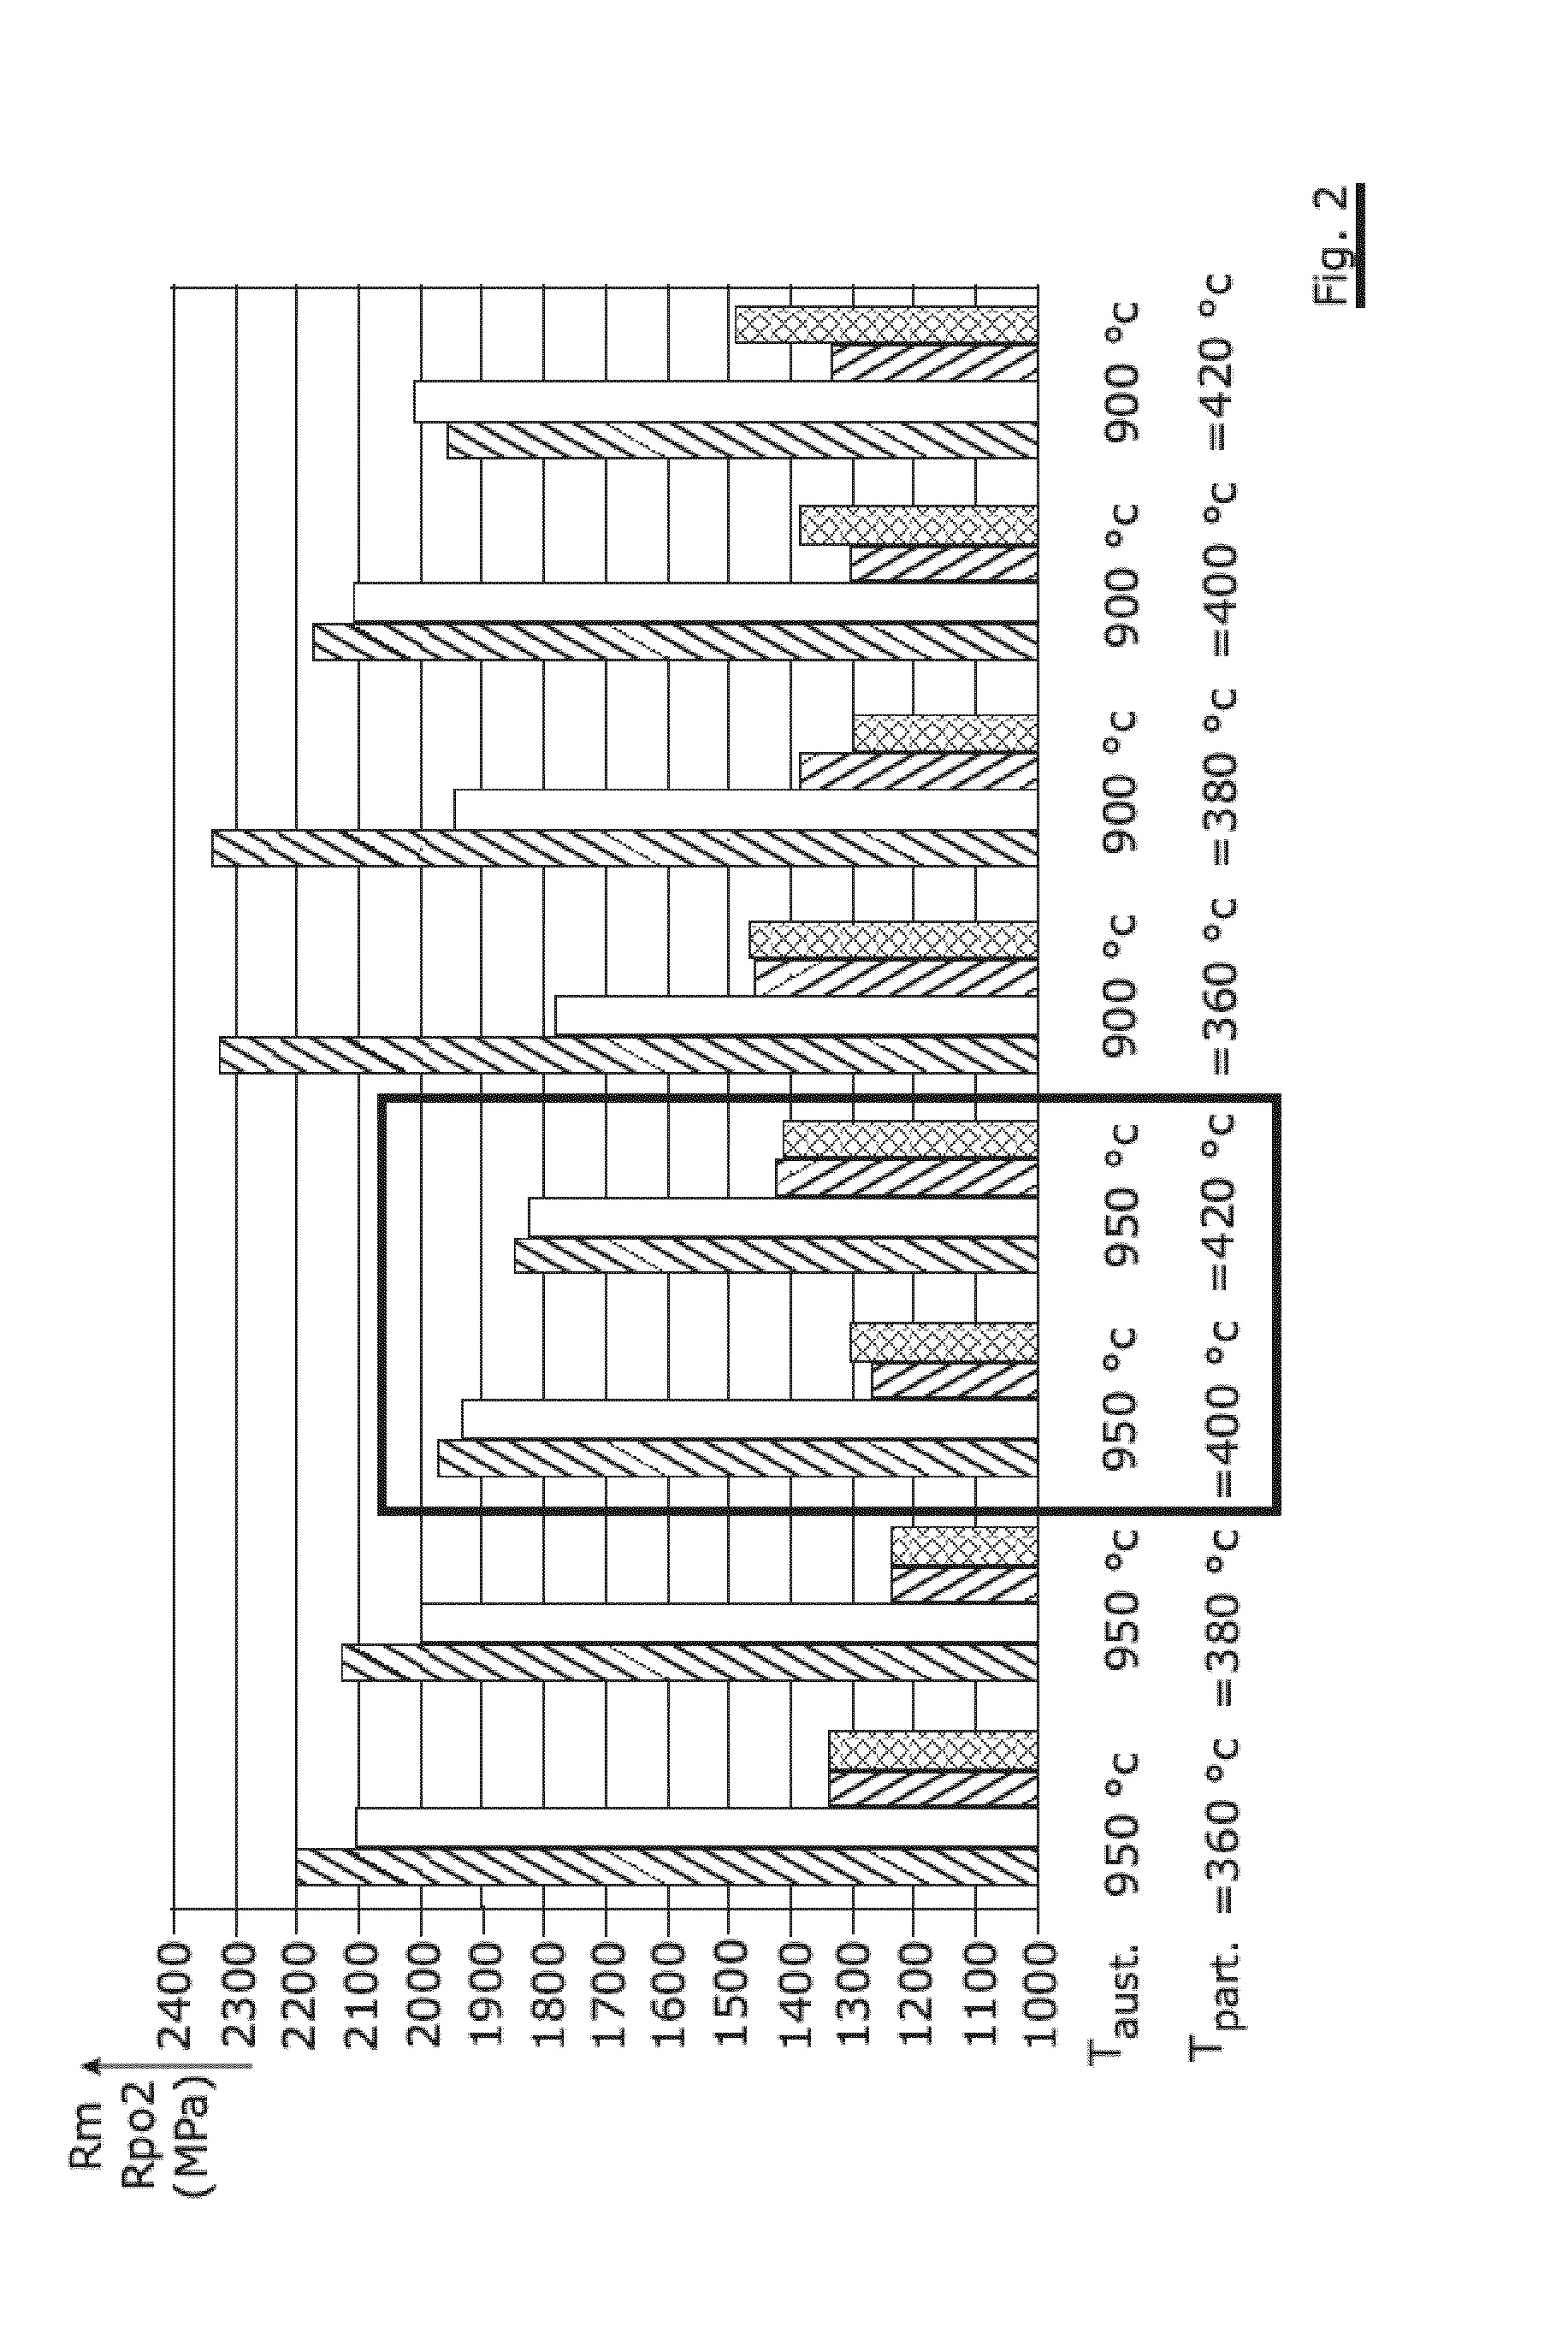 Quenched and partitioned high-carbon steel wire